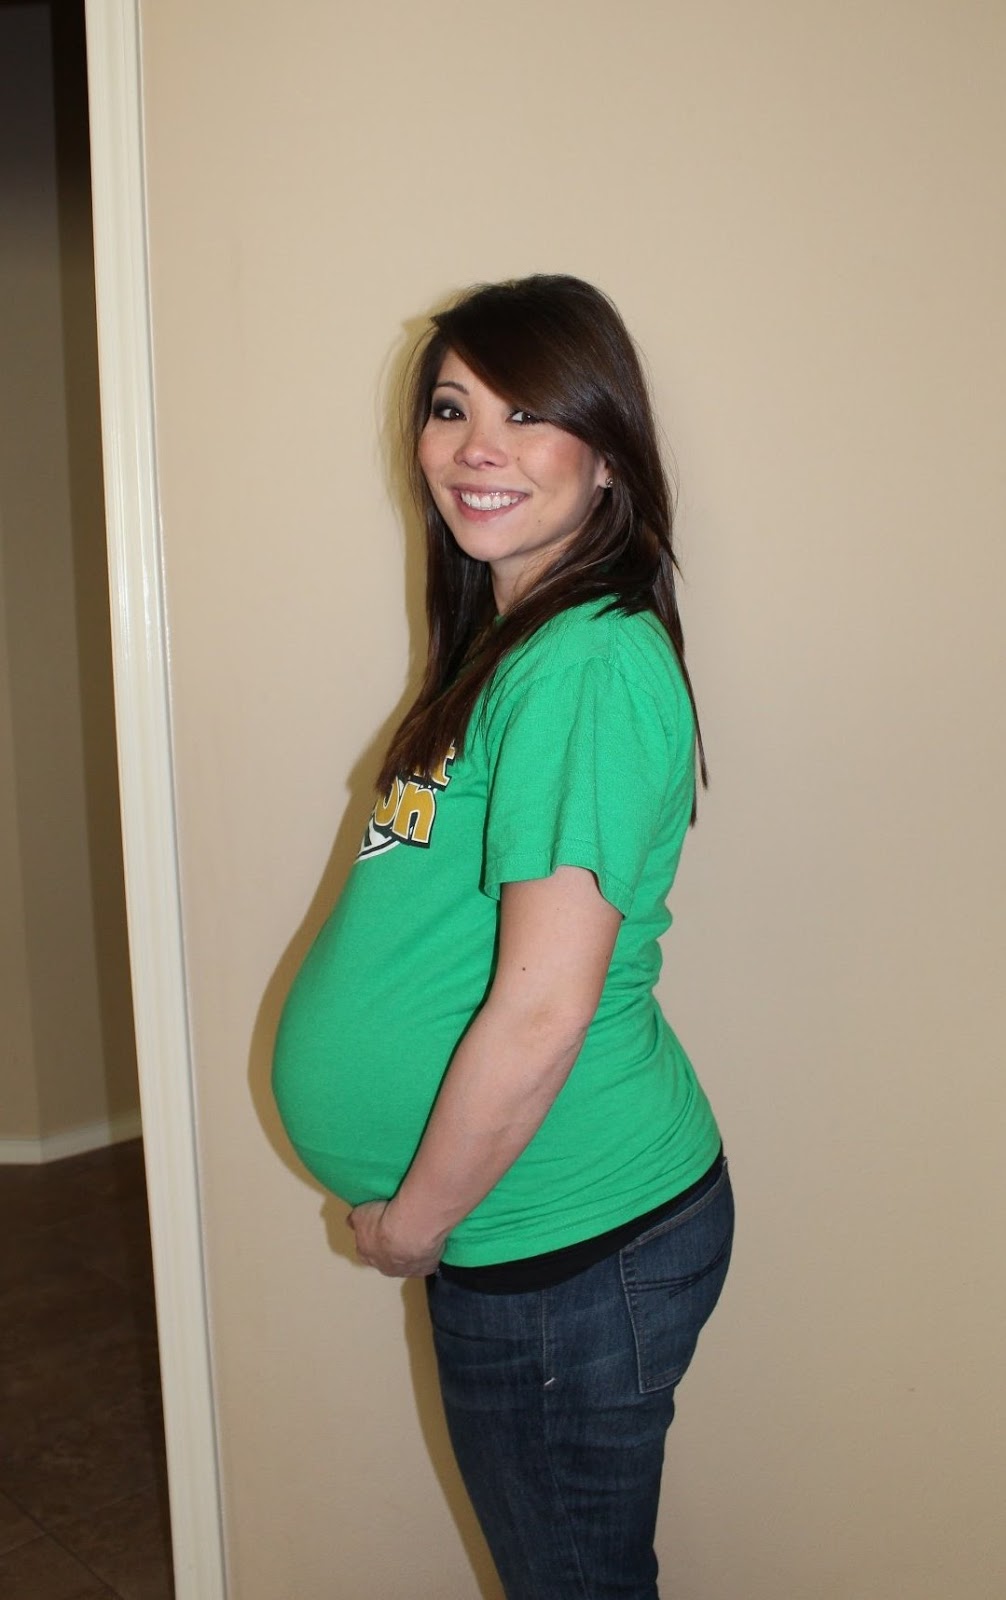 36 Weeks 3 Days Pregnant Baby Development: An Exciting Journey!